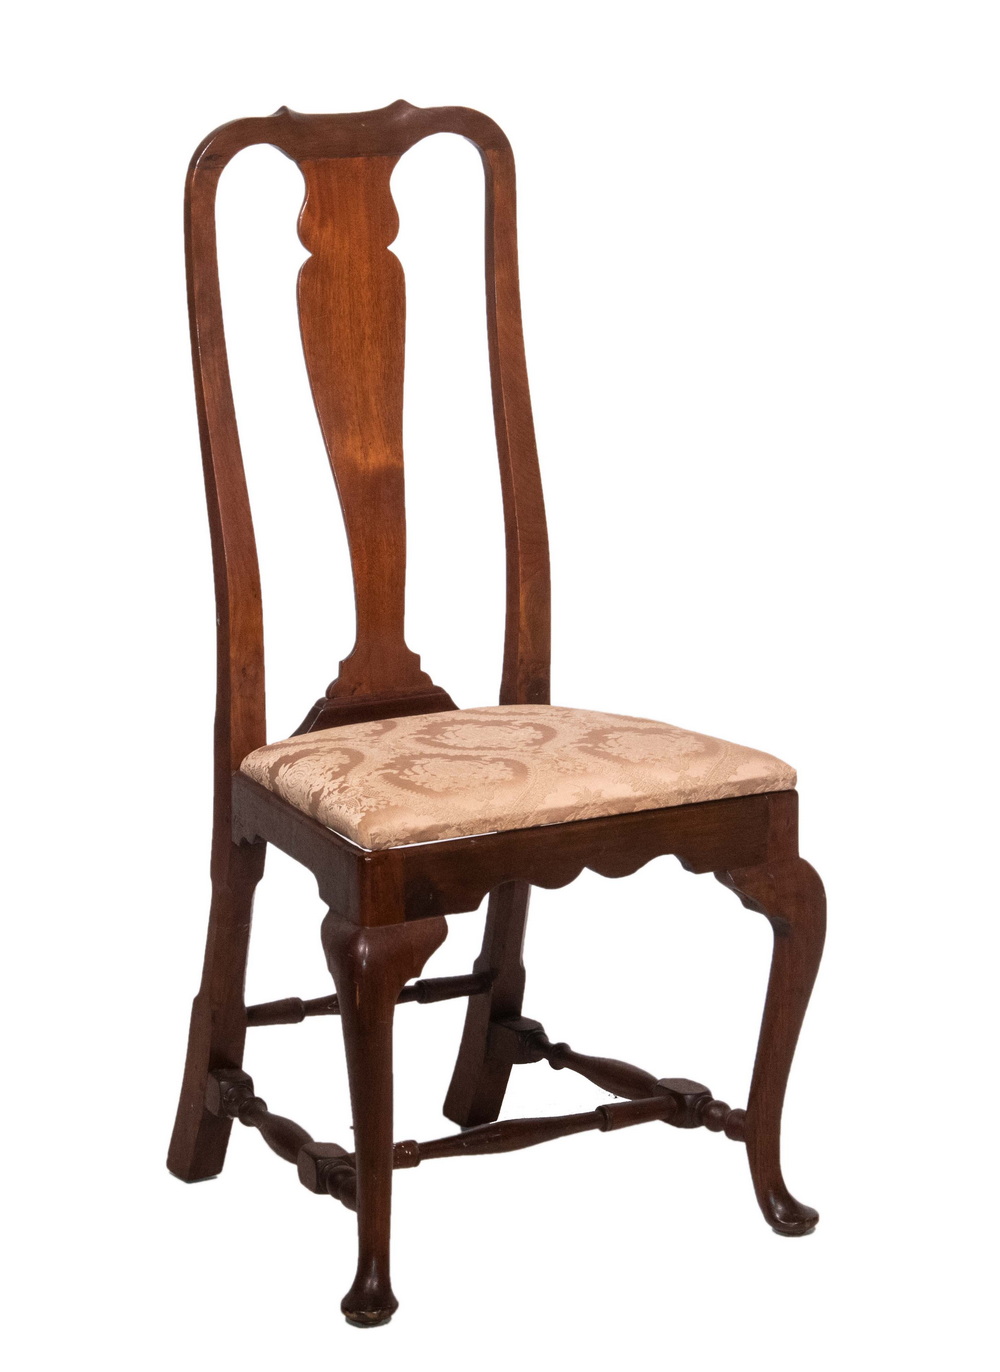 QUEEN ANNE SIDE CHAIR 18th c. Mahogany